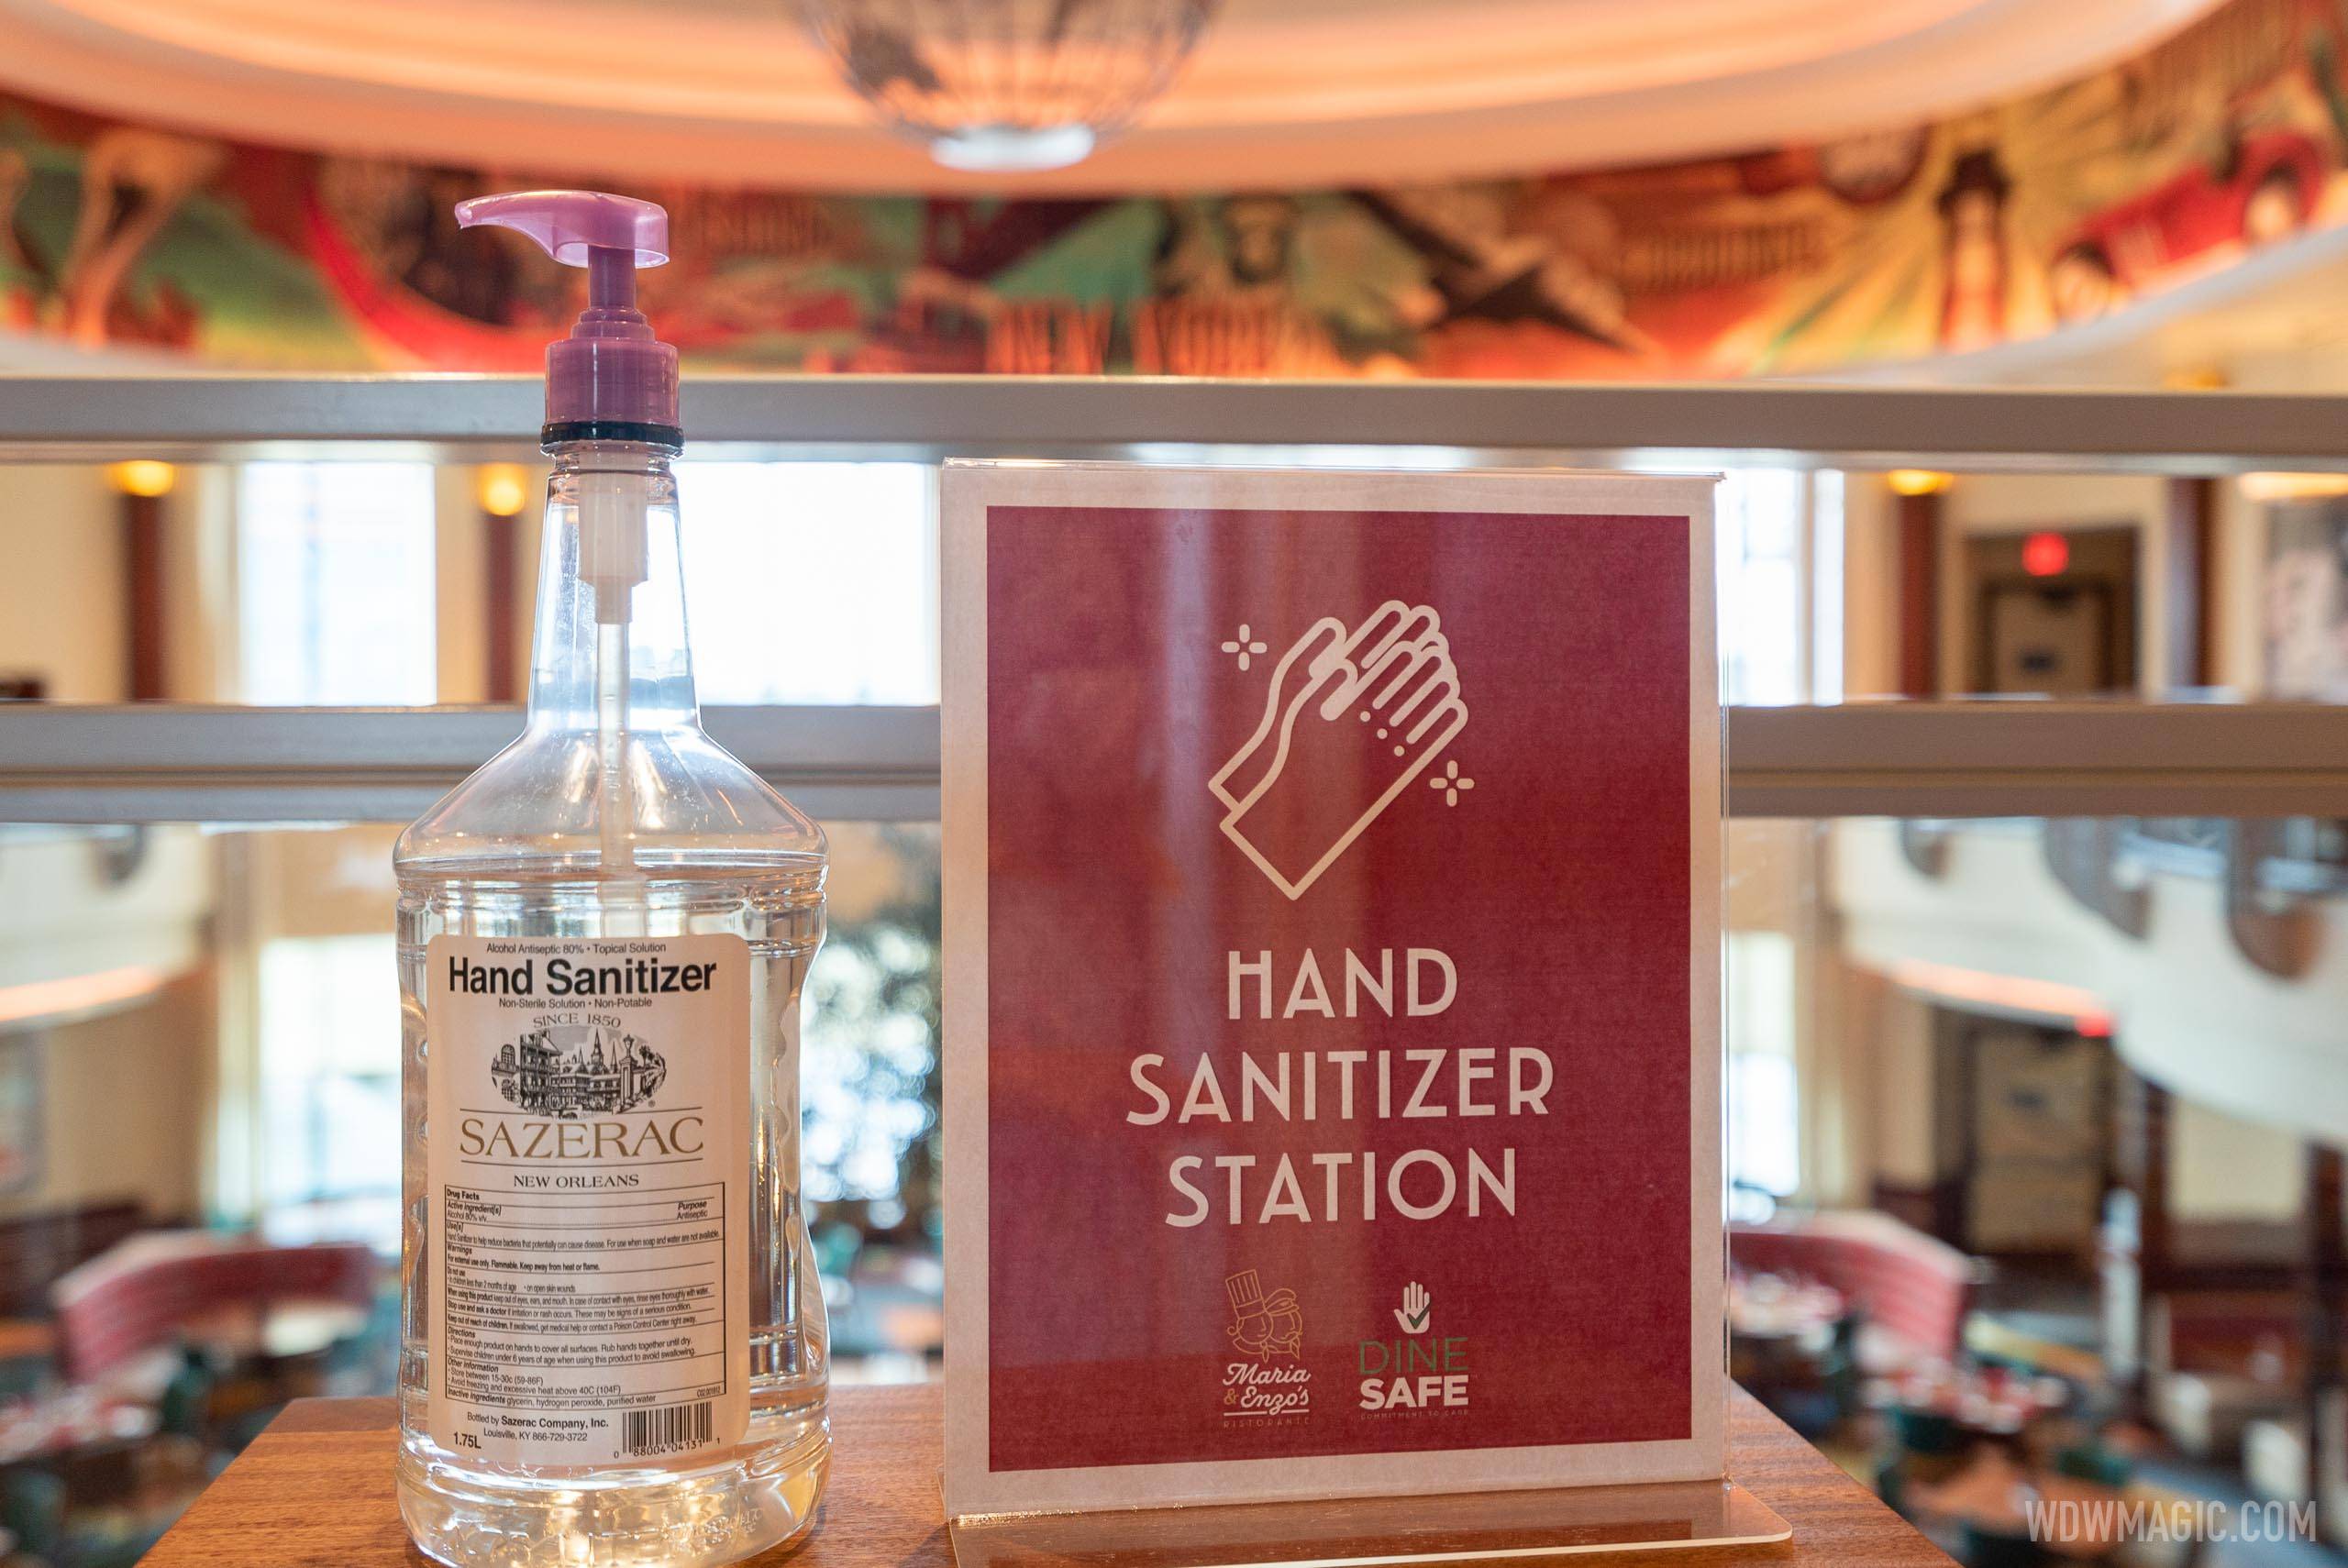 Hand sanitizer station at Maria and Enzo's